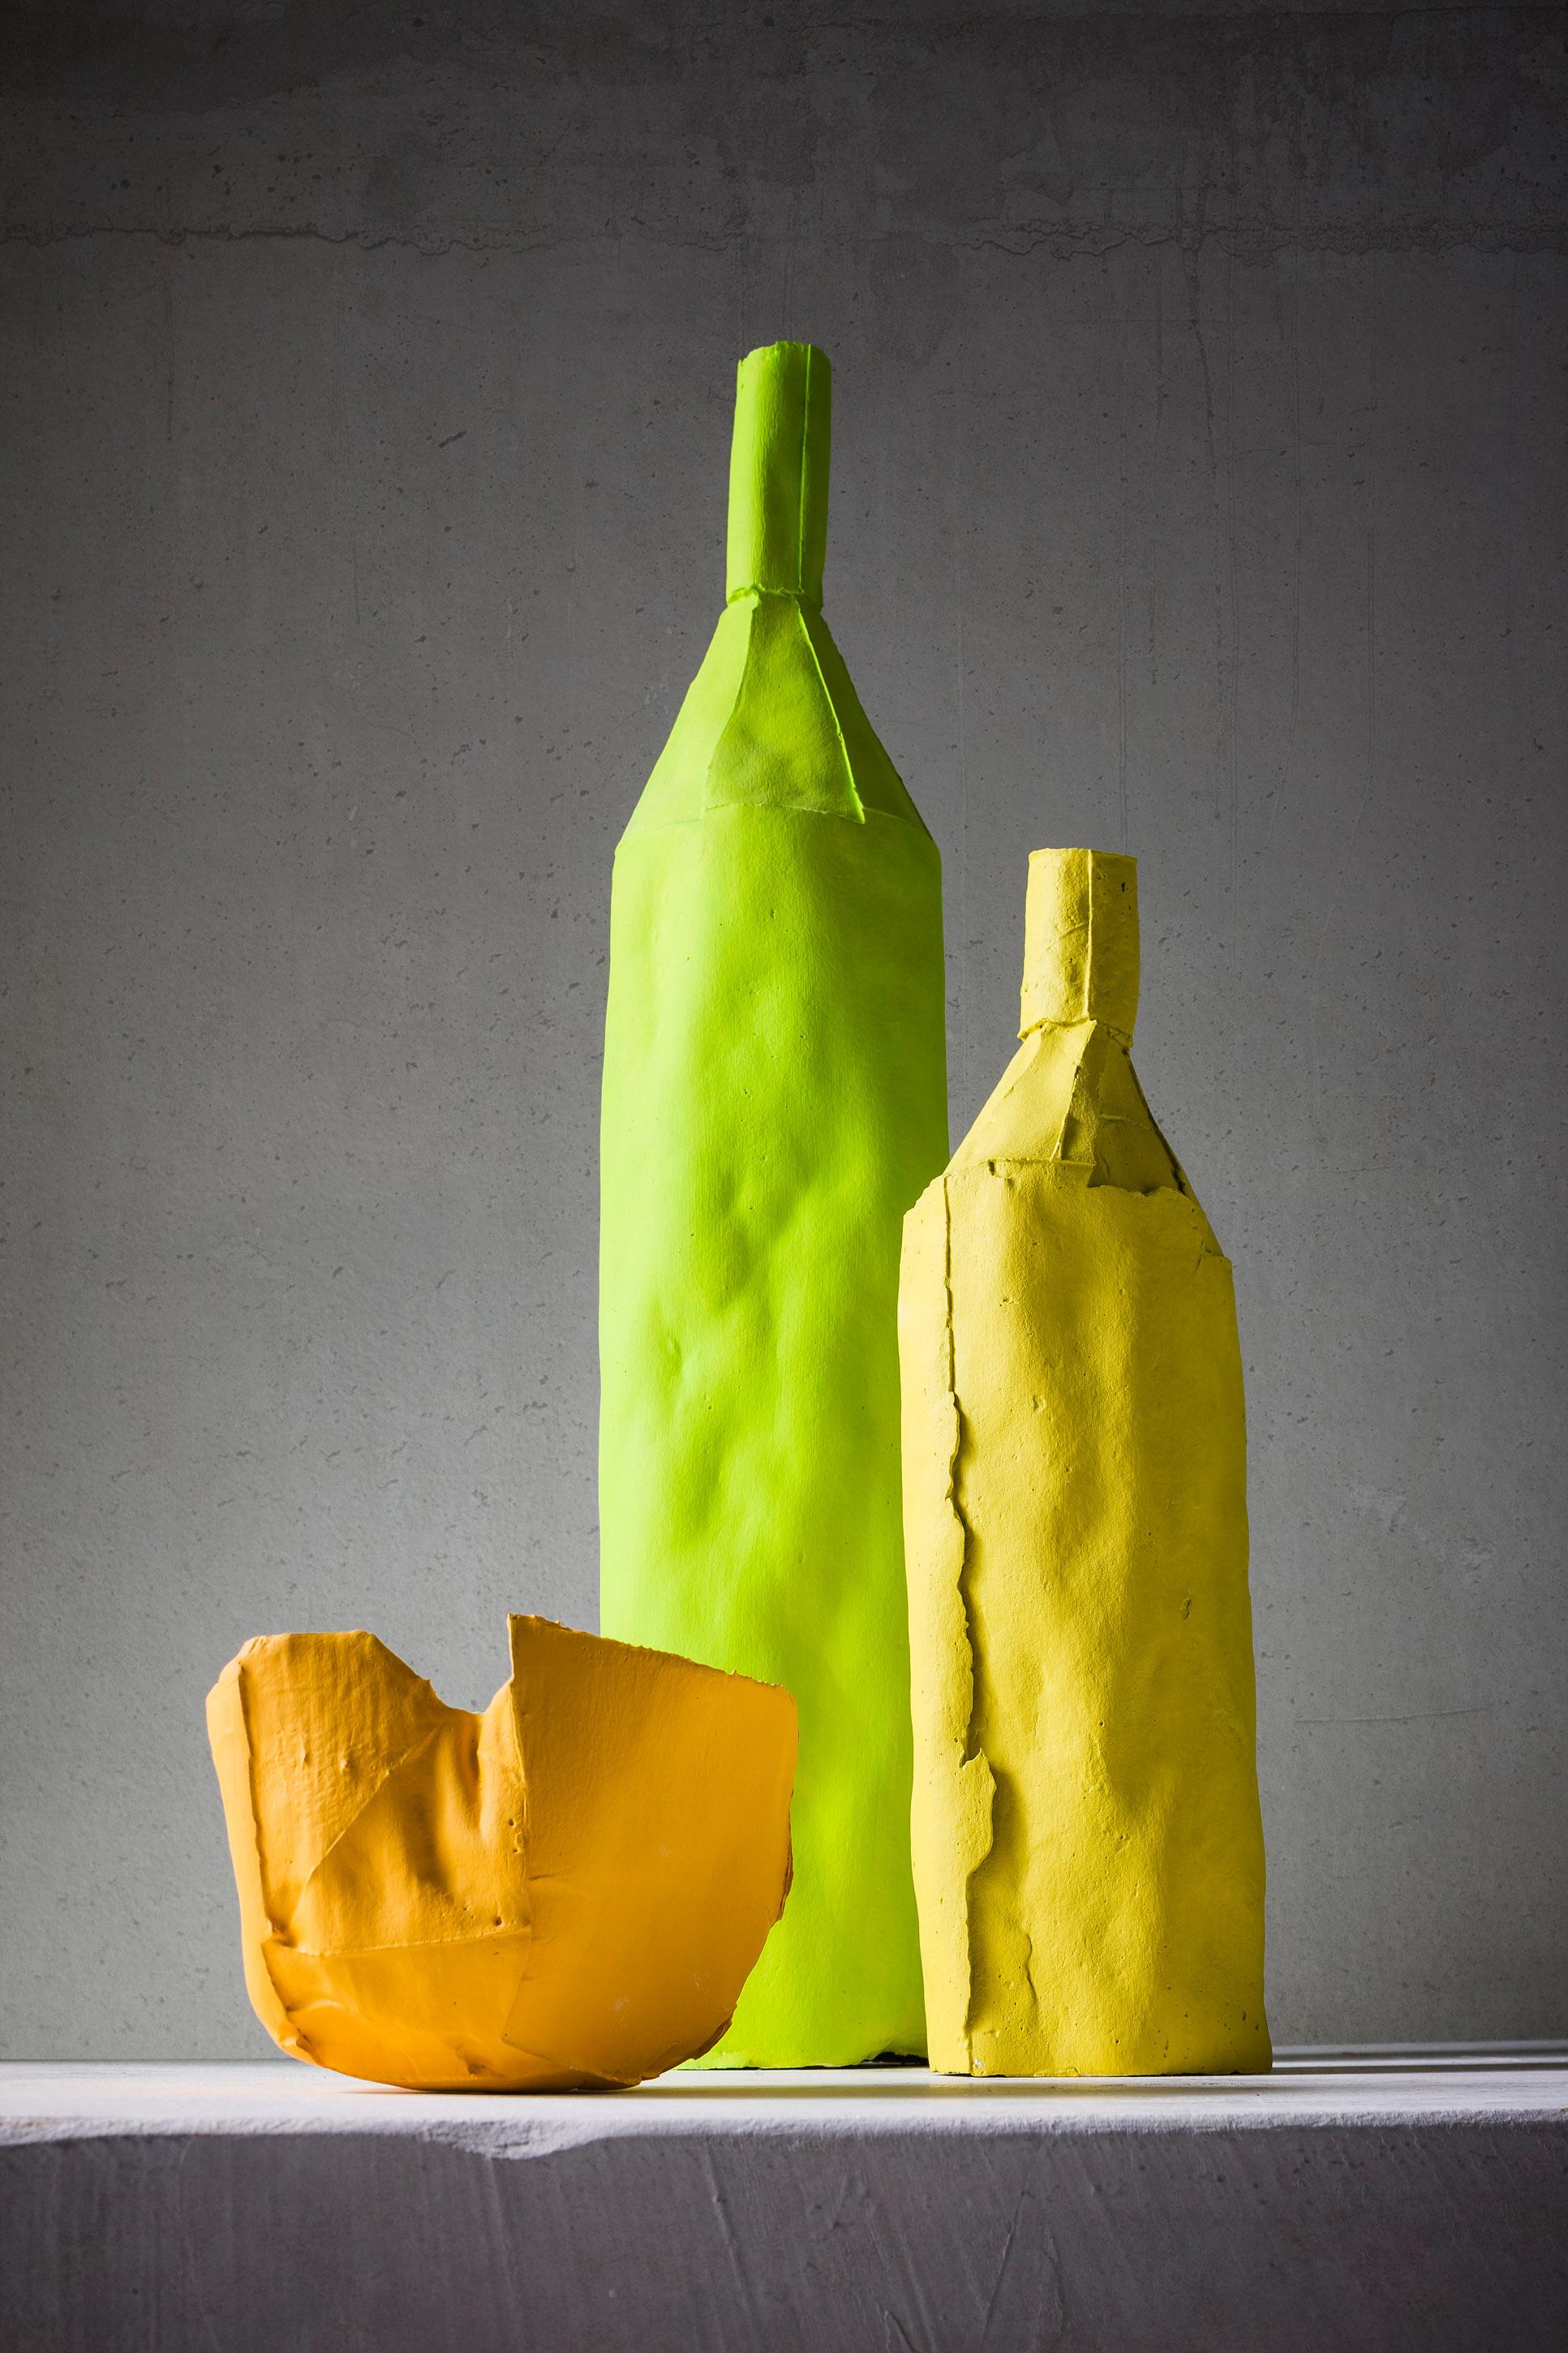 Italian ceramist Paola Paronetto's distinctive style is epitomized in transforming objects of daily use into exclusive decorative yet functional artwork. This remarkable yellow bottle displays a captivating texture resulting from the skilful